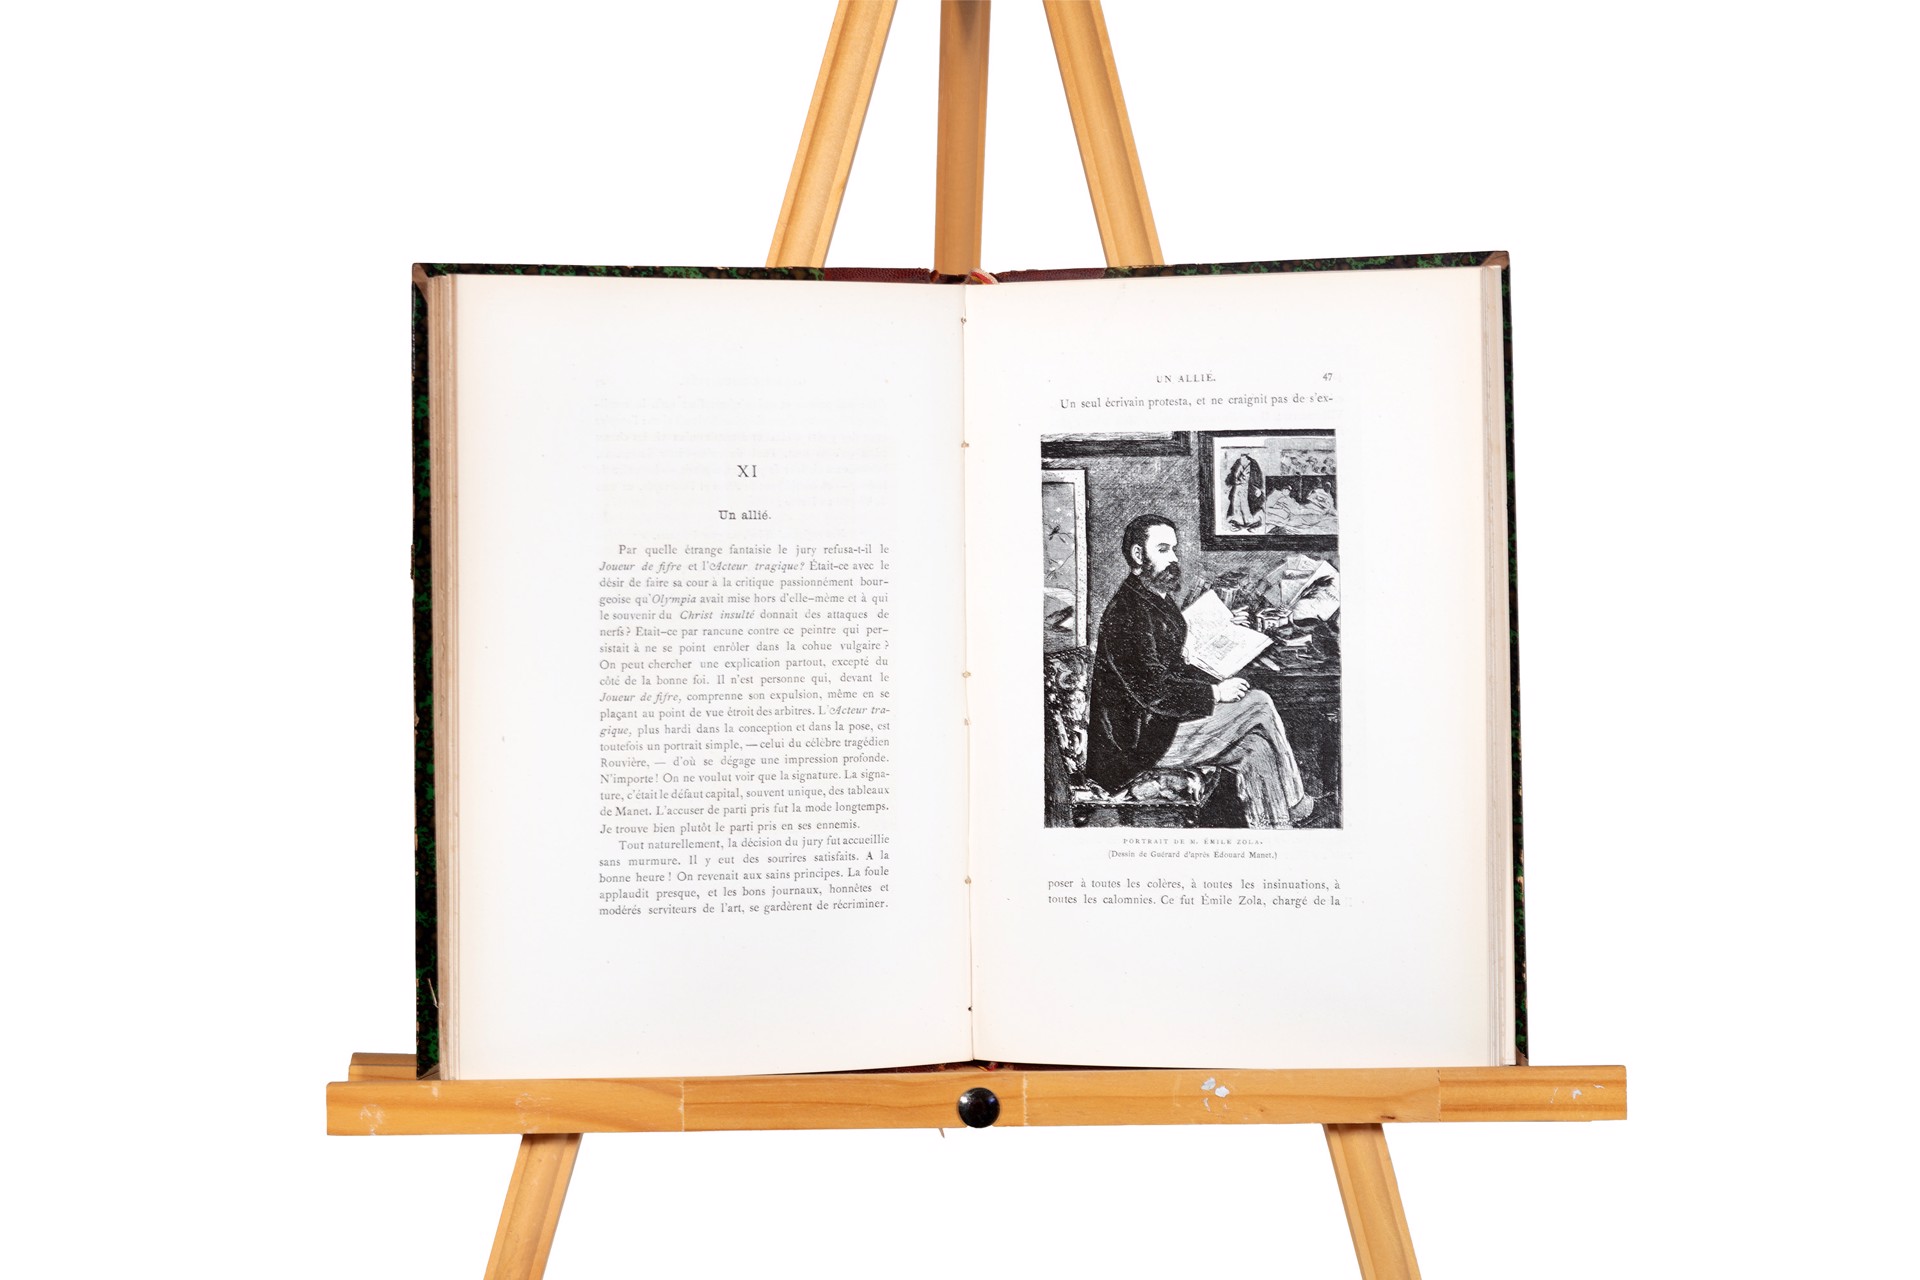 Edouard Manet, by Edmond Bazire Contains 2 original etchings by Edouard Manet (1832-1883)